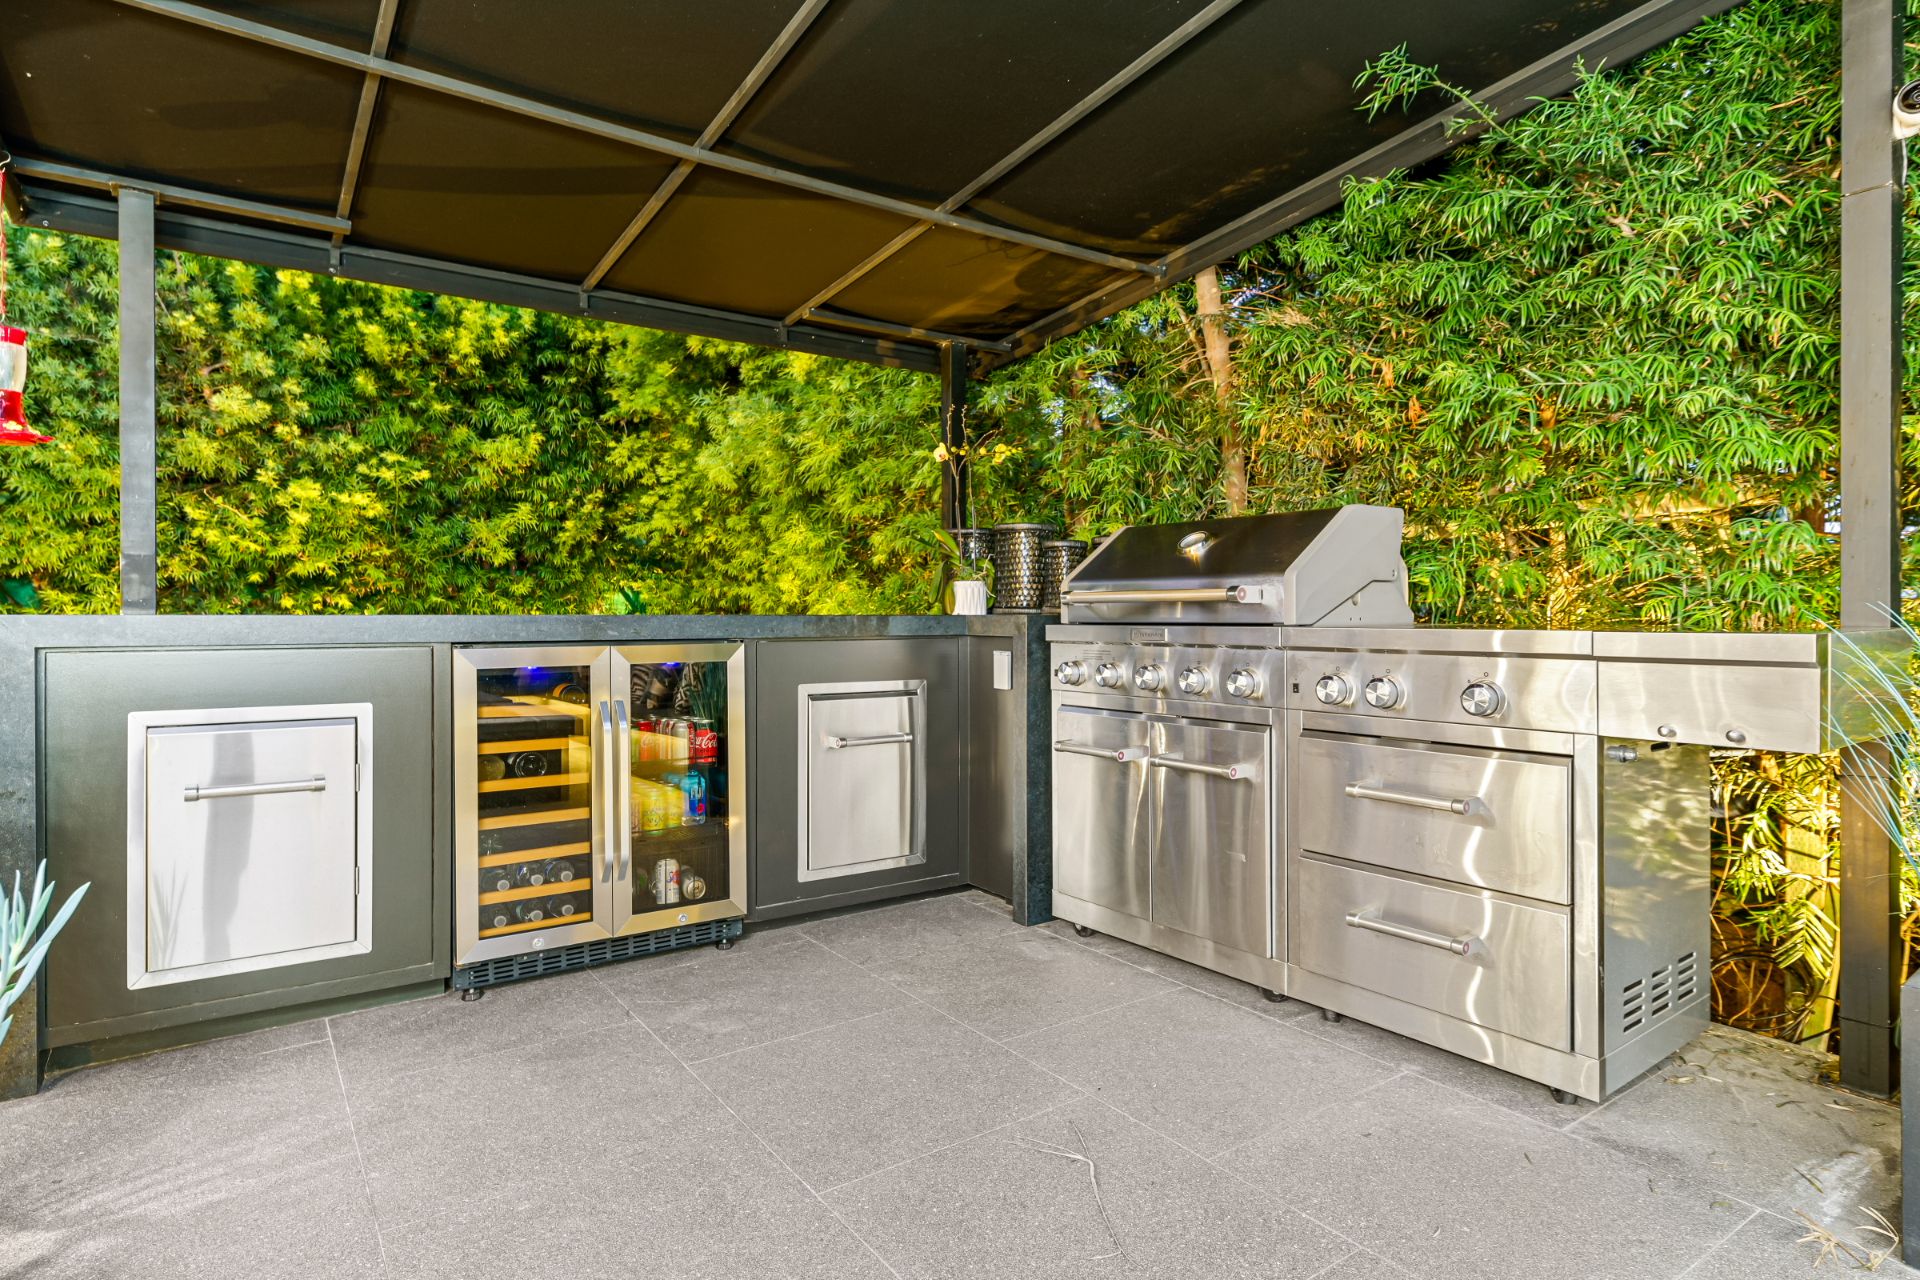 exterior view of the outdoor kitchen with stainless steel appliances